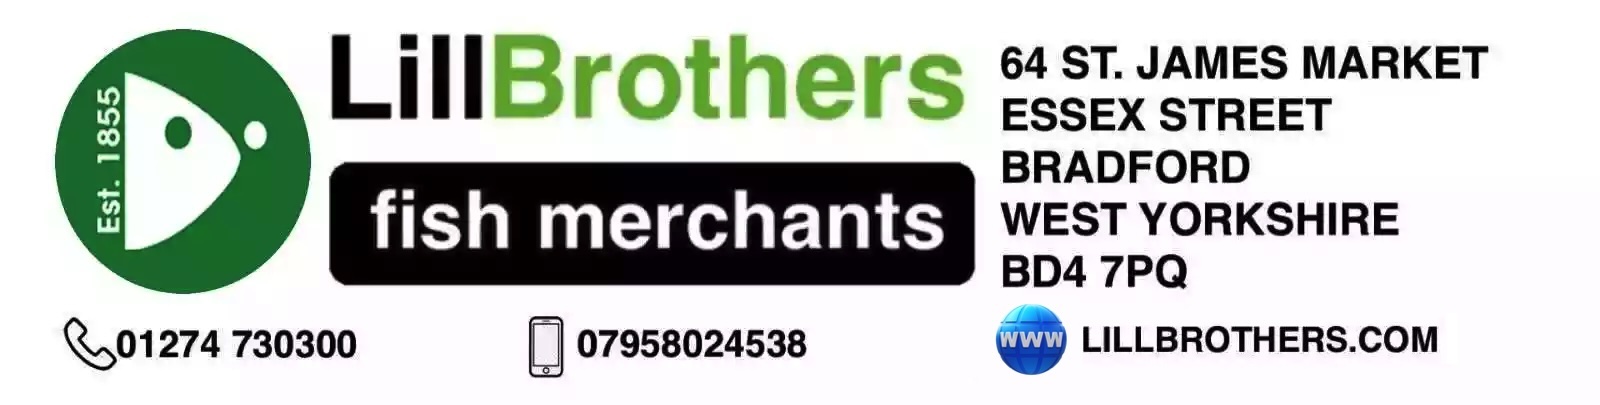 Contact : Lill Brothers Wholesale Fish Merchants Est 1855 Fresh and Frozen Fish and Seafood now with Locallill brothers contact banner 1